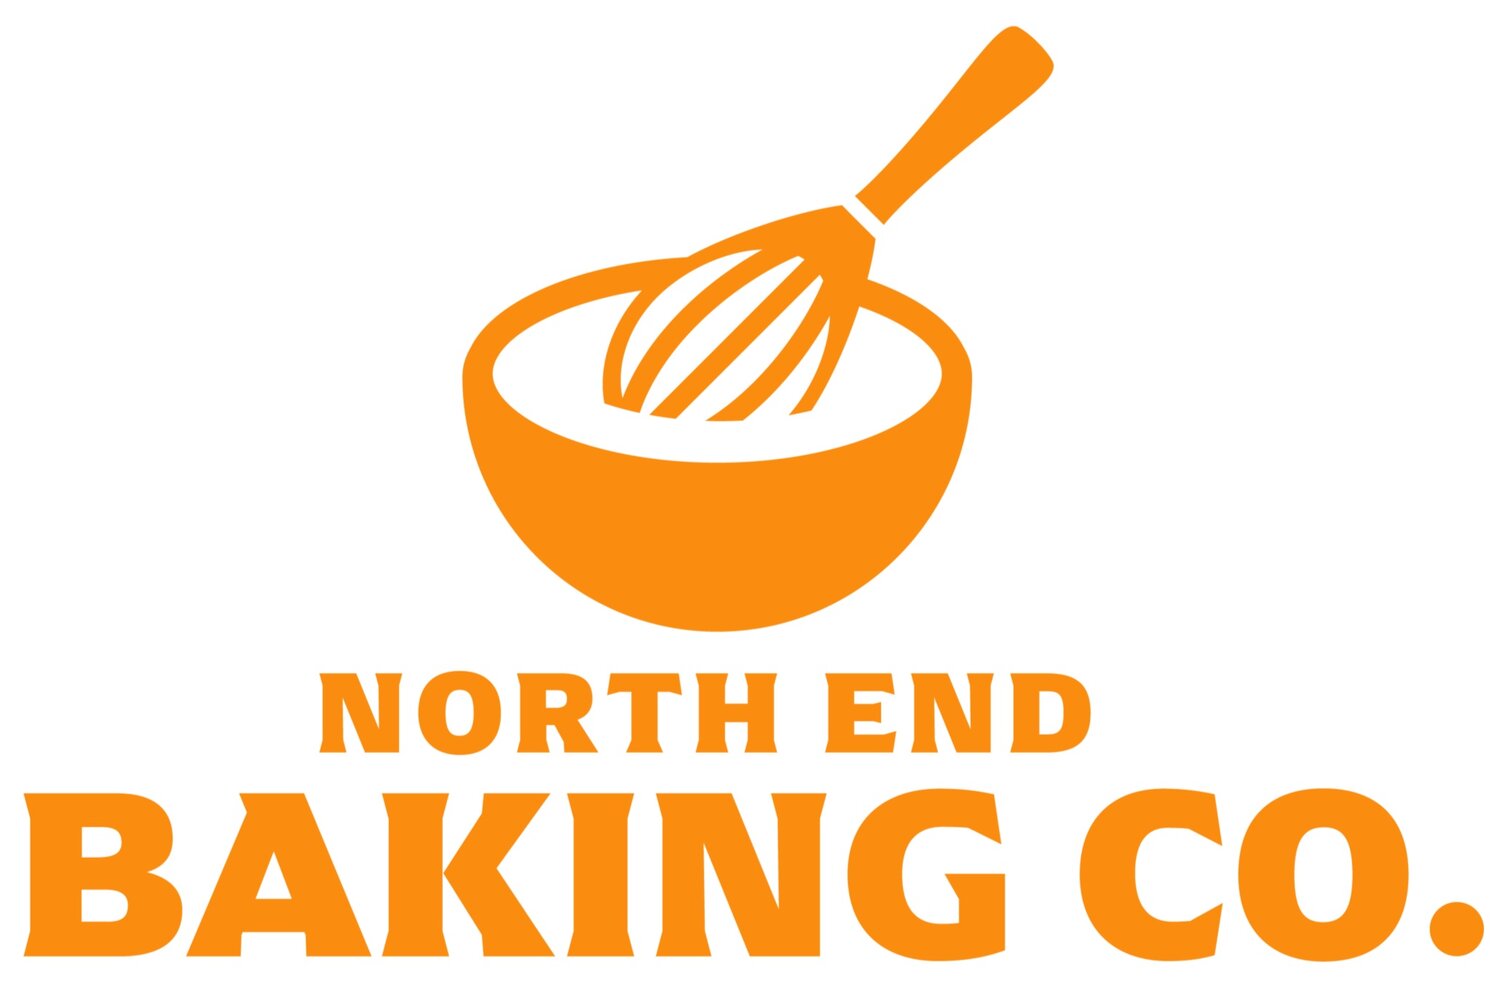 North End Baking Co.